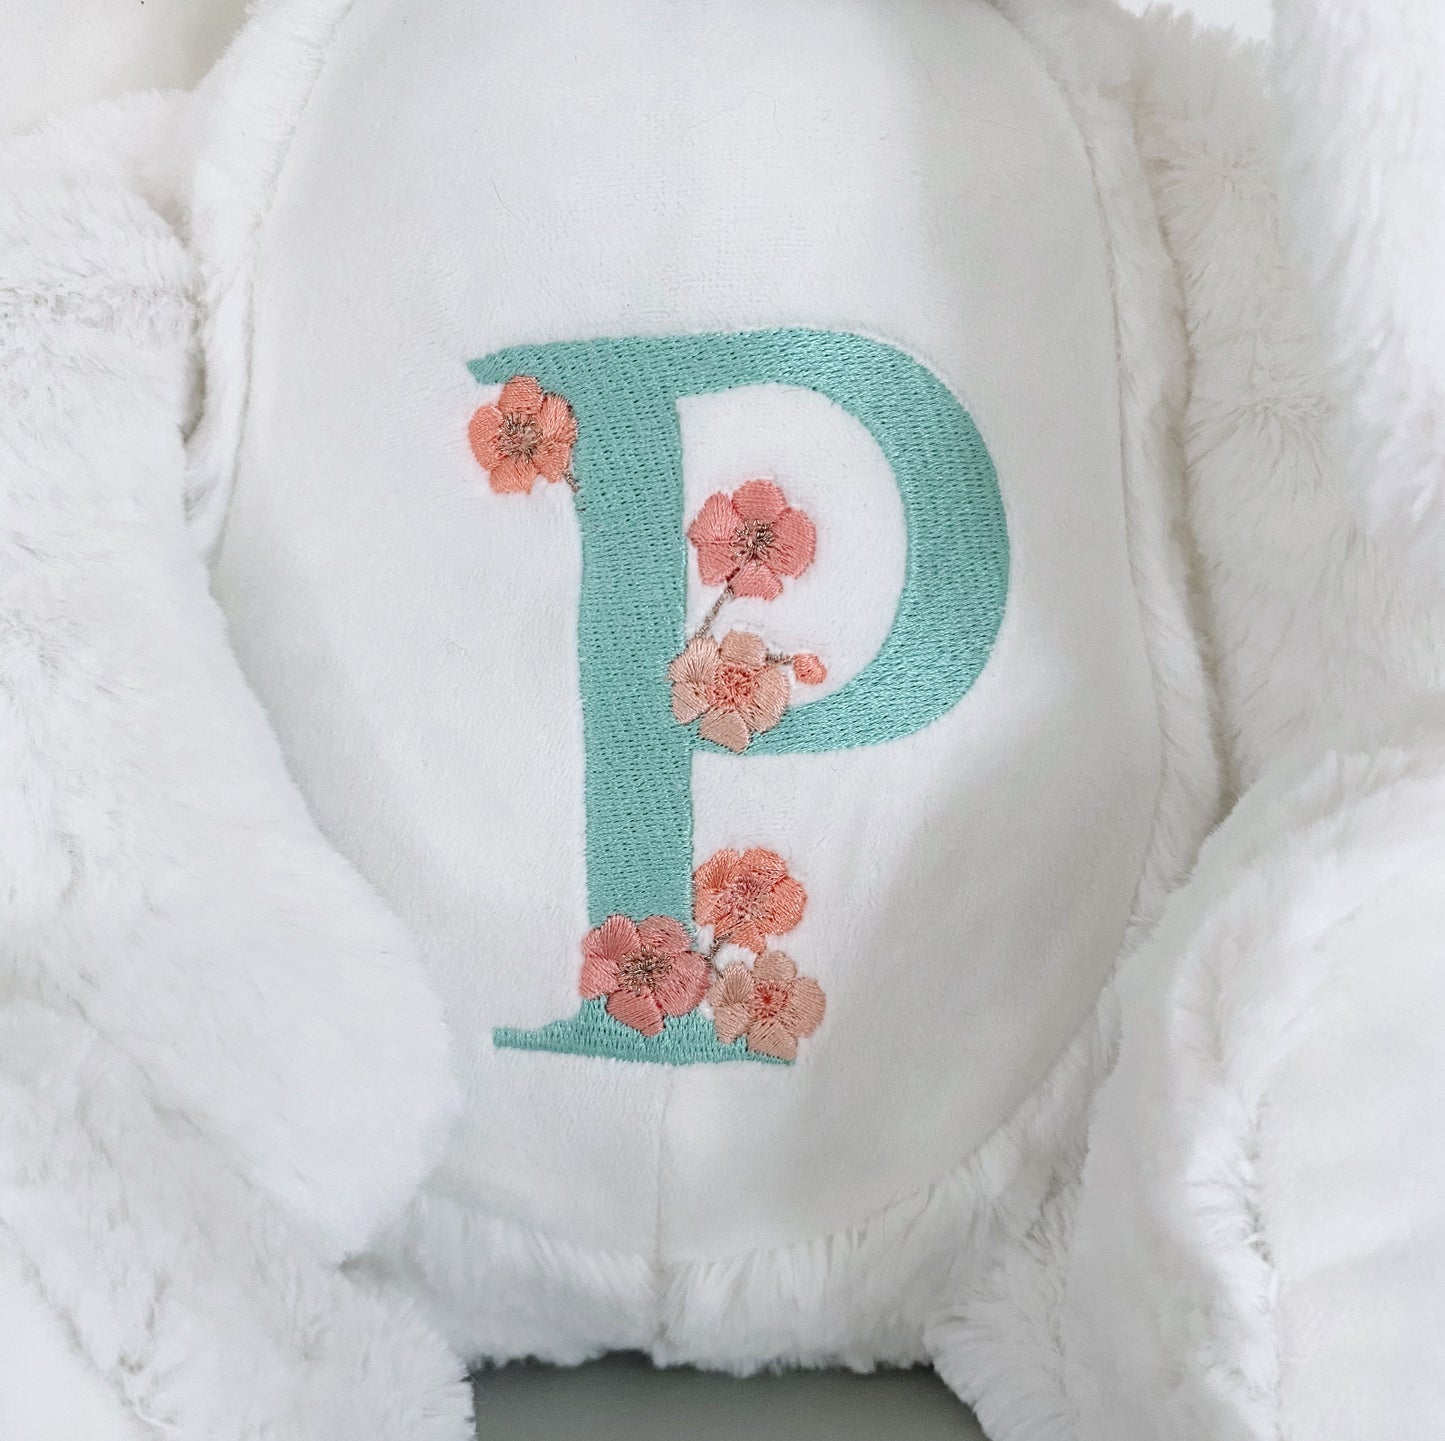 Embroidered Flower Initial Bunny Soft Toy